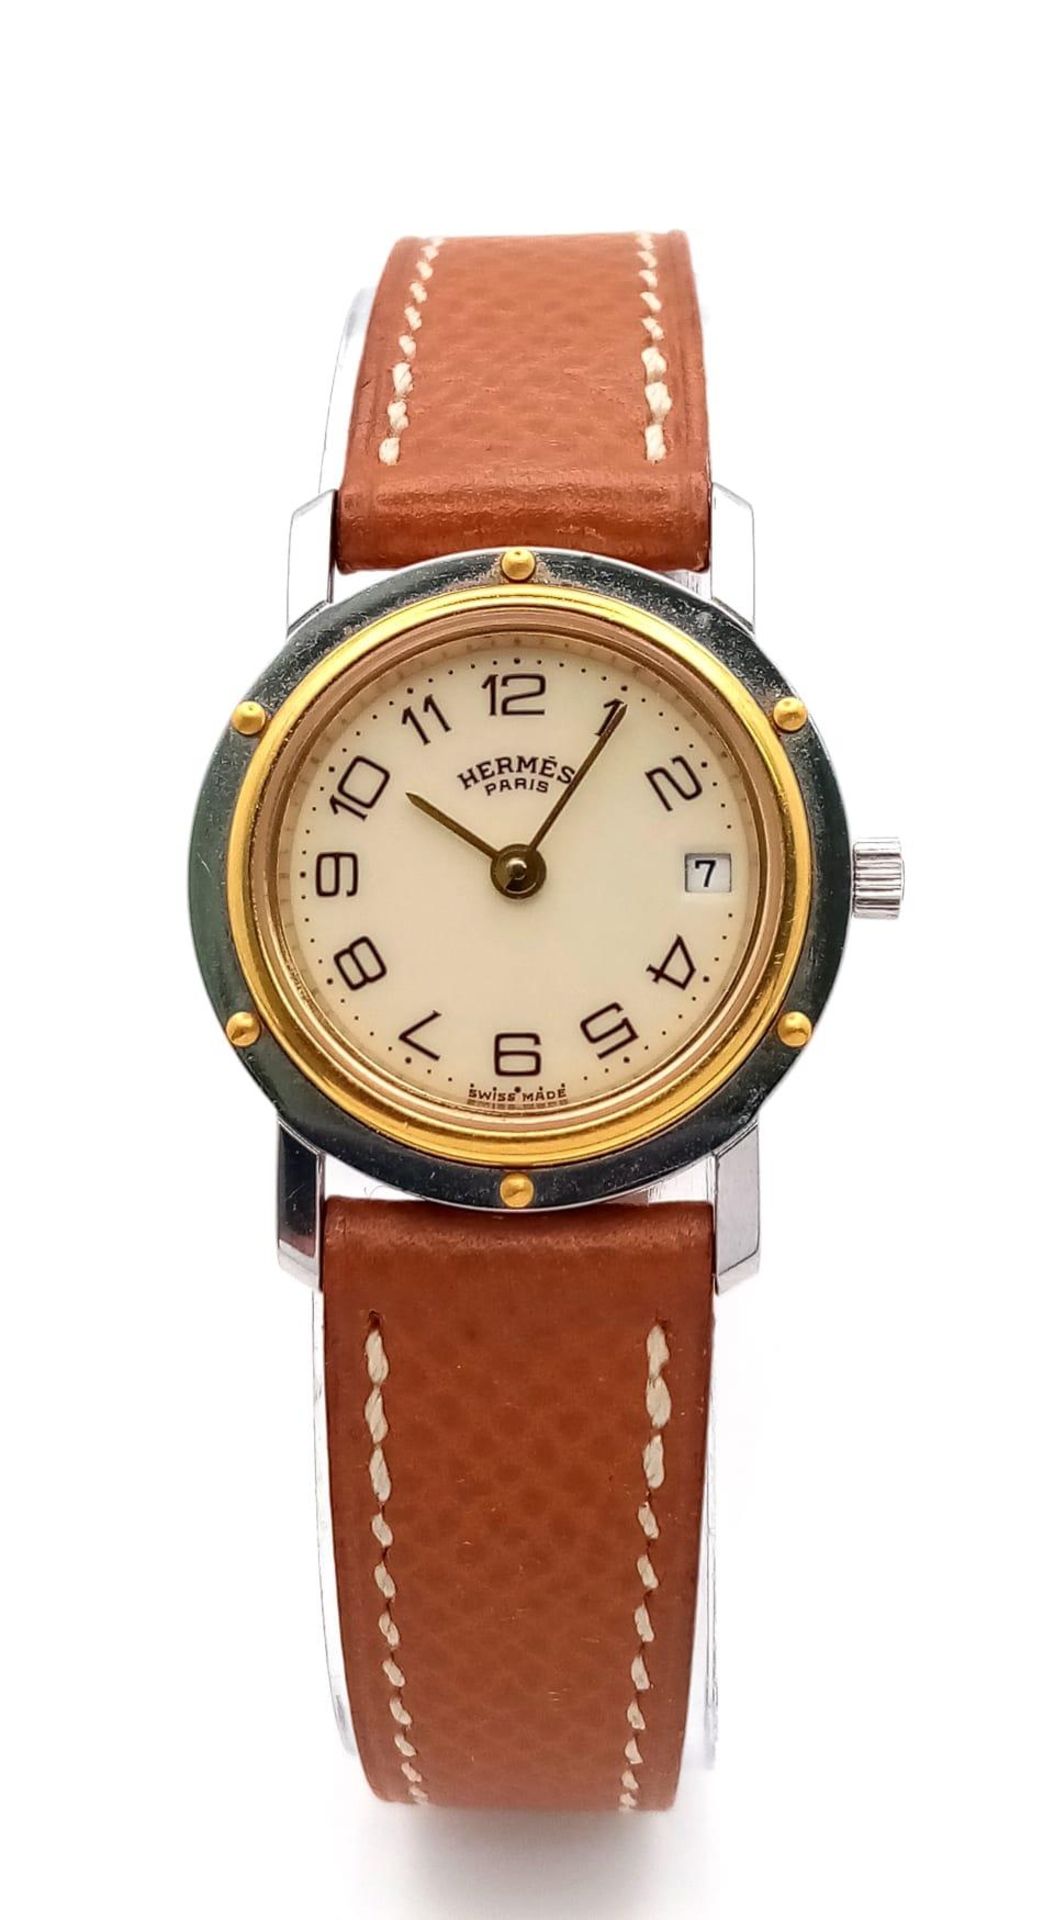 A FABULOUS HERMES OF PARIS LADIES WRISTWATCH WITH GOLD AND STAINLESS STEEL BODY AND TASTEFUL CREAM - Image 2 of 8